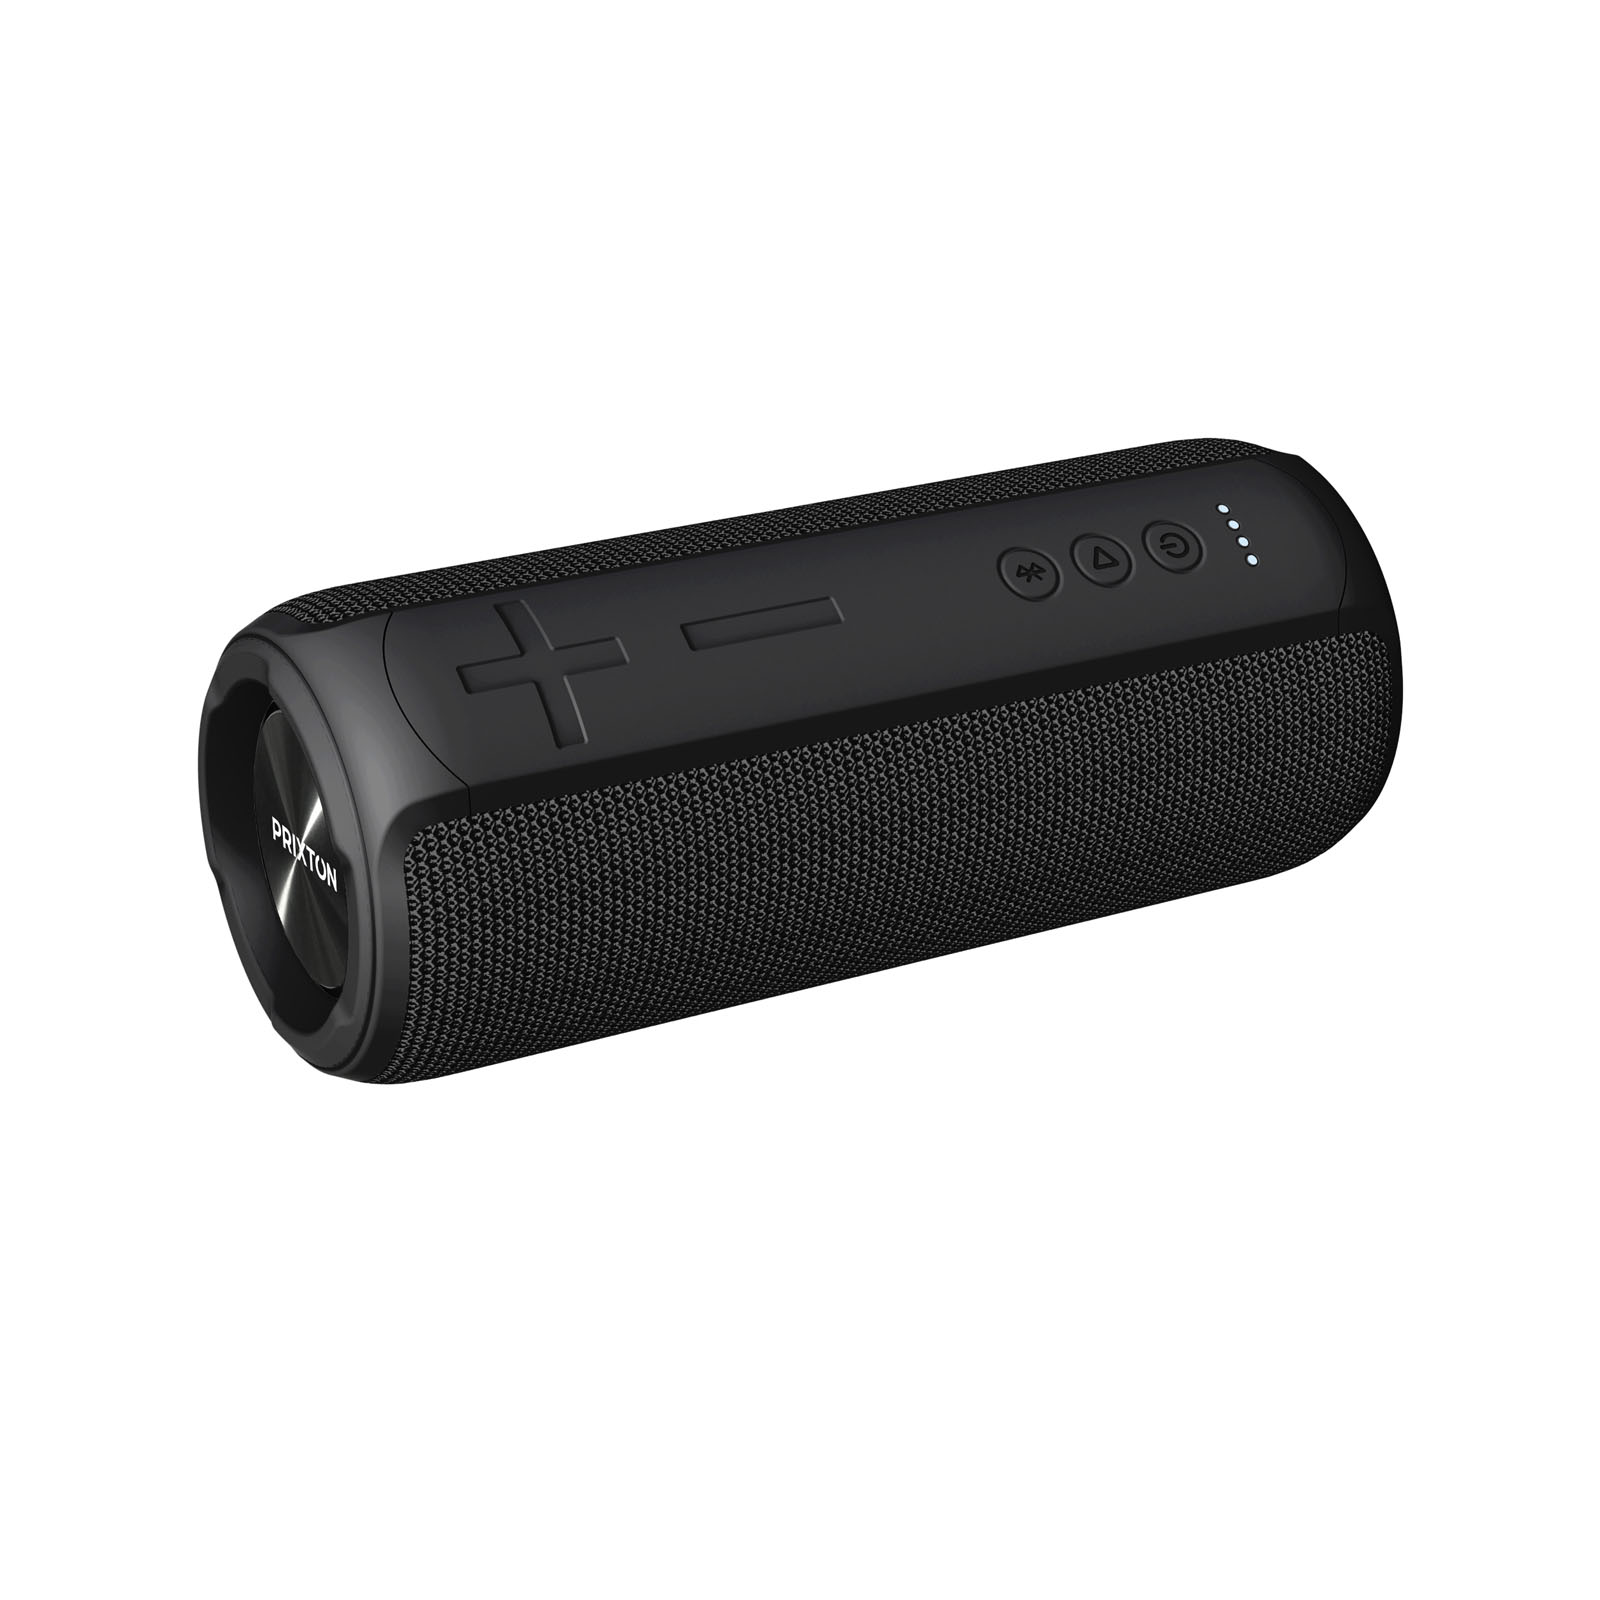 Bluetooth speaker resistant to splashes and with a microphone - Wigston Magna